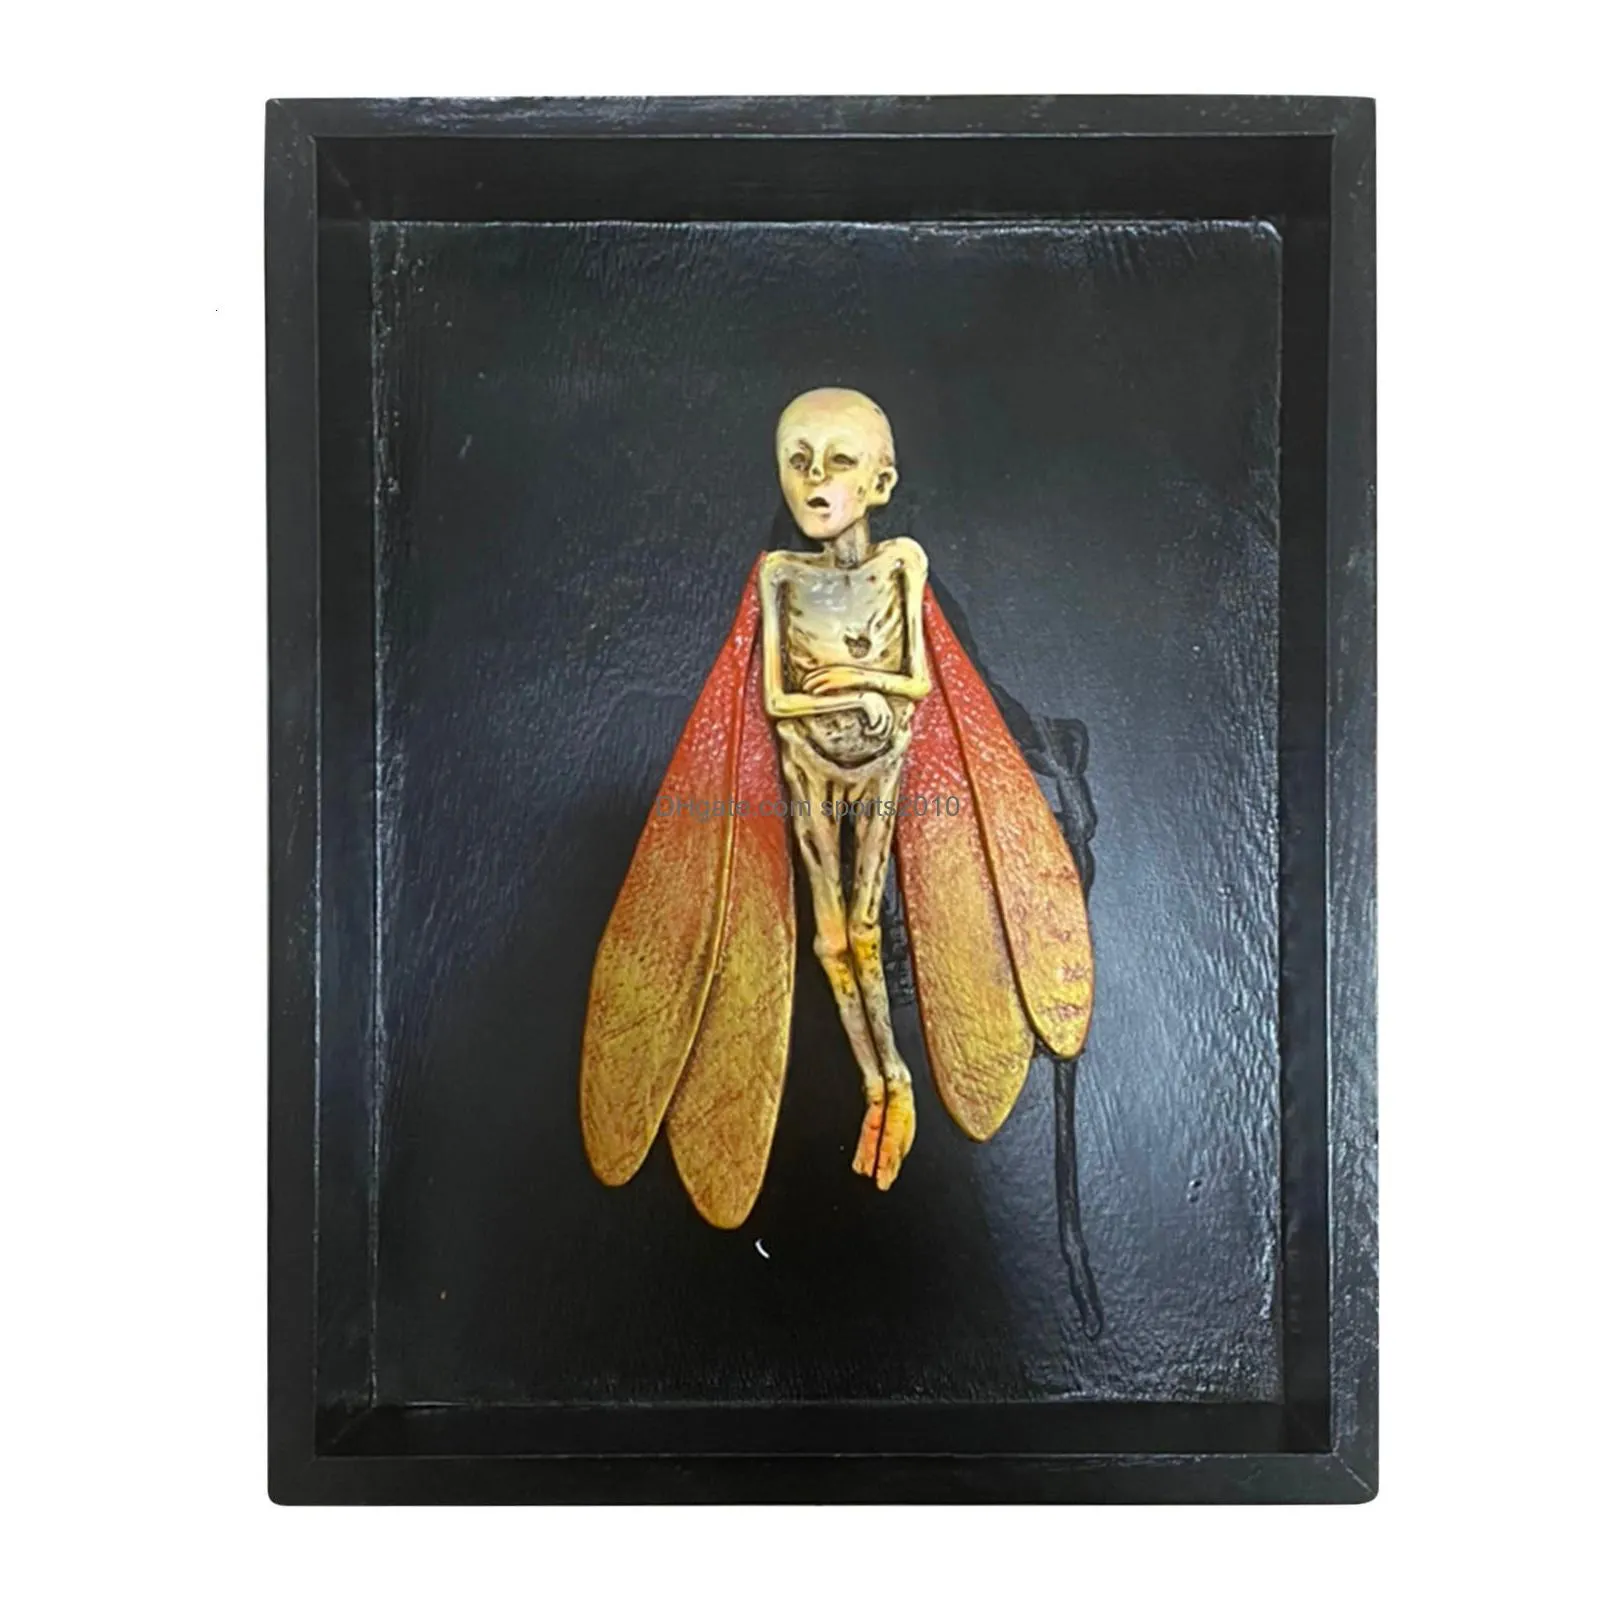 Decorative Objects & Figurines Decorative Objects Figurines Gothic Home Decor Mummified Fairy Skeleton Witchy Specimen Statue Picture Dhga0